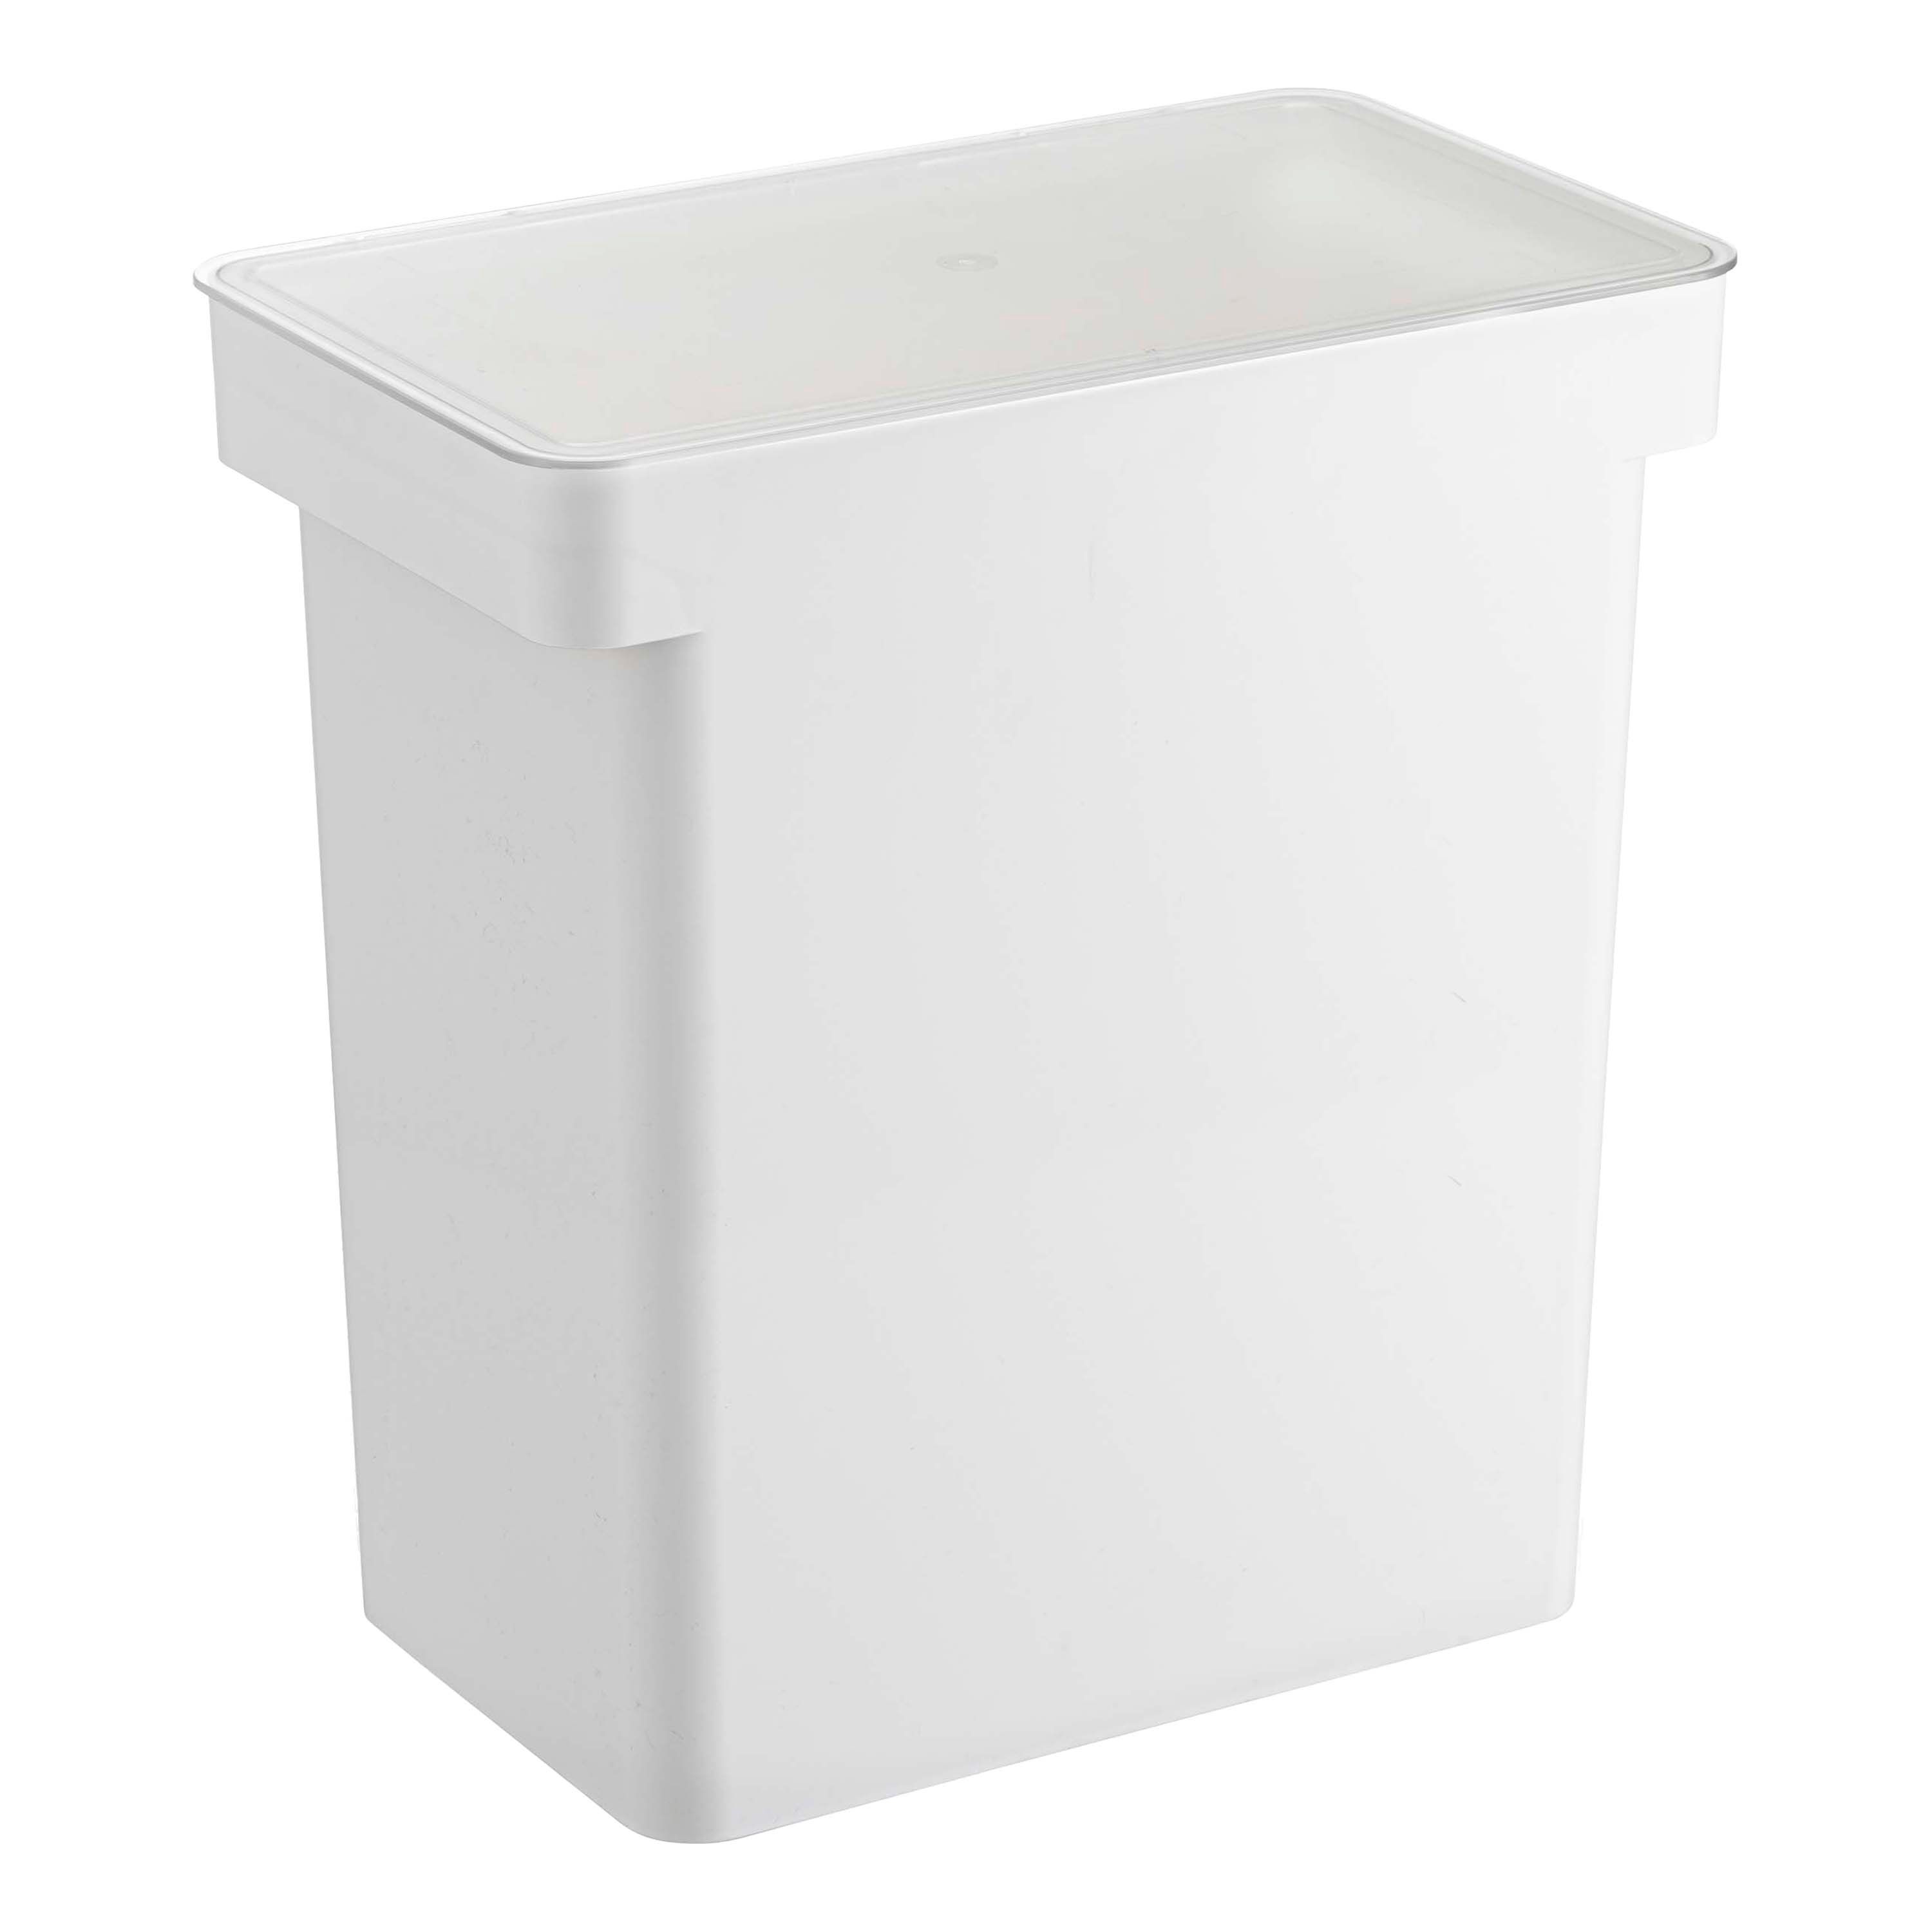 https://www.containerstore.com/catalogimages/488896/tqXEQZ7Y.jpg